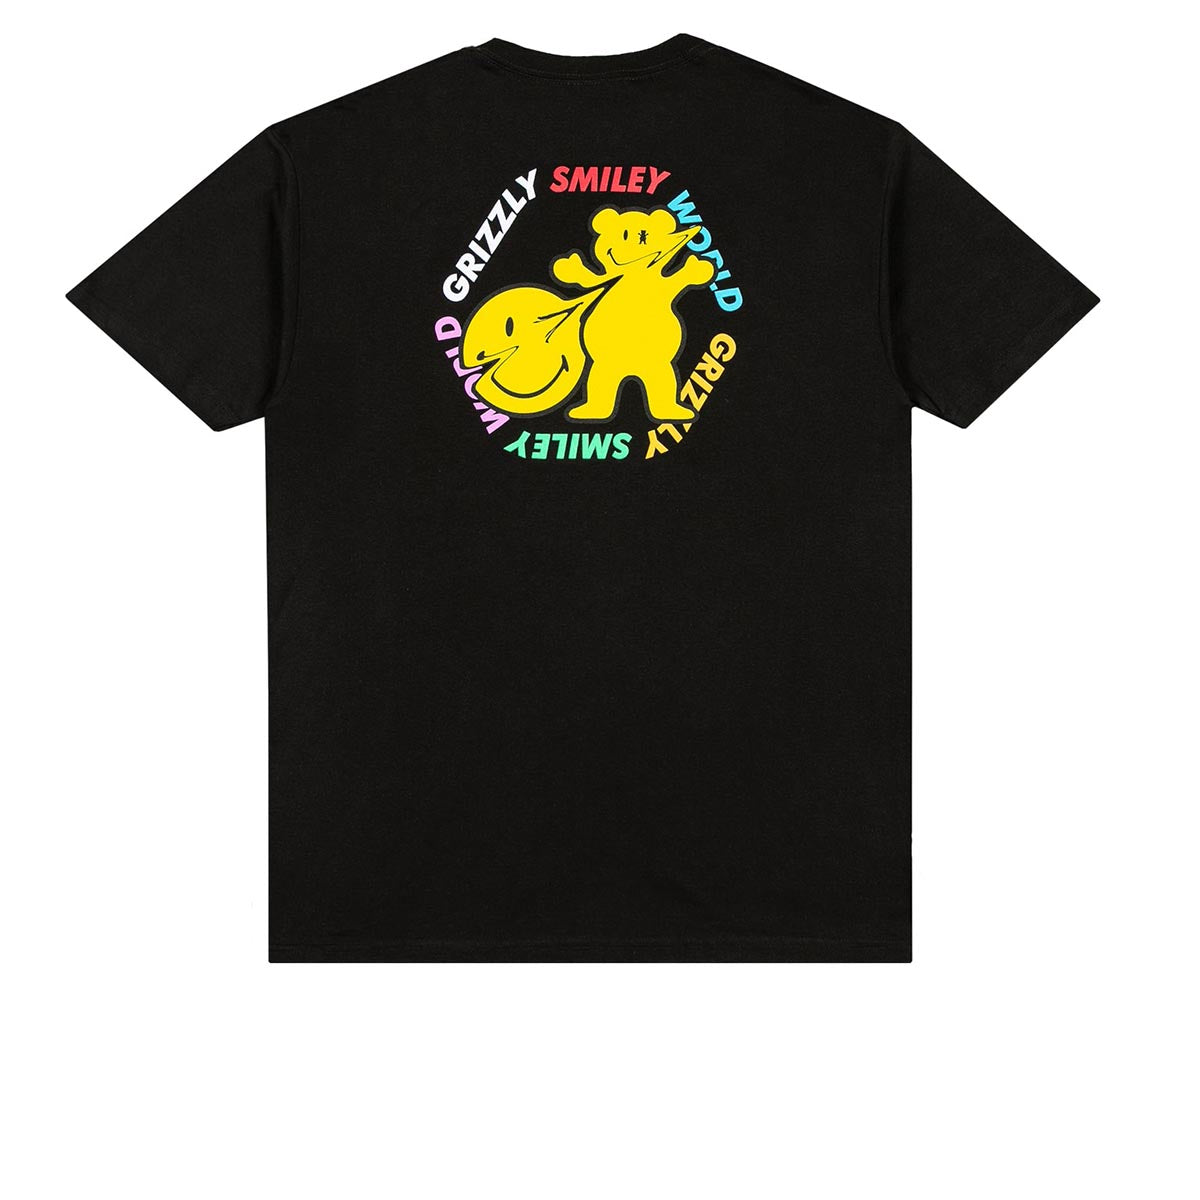 Grizzly x Smiley World T-Shirt - Black image 2